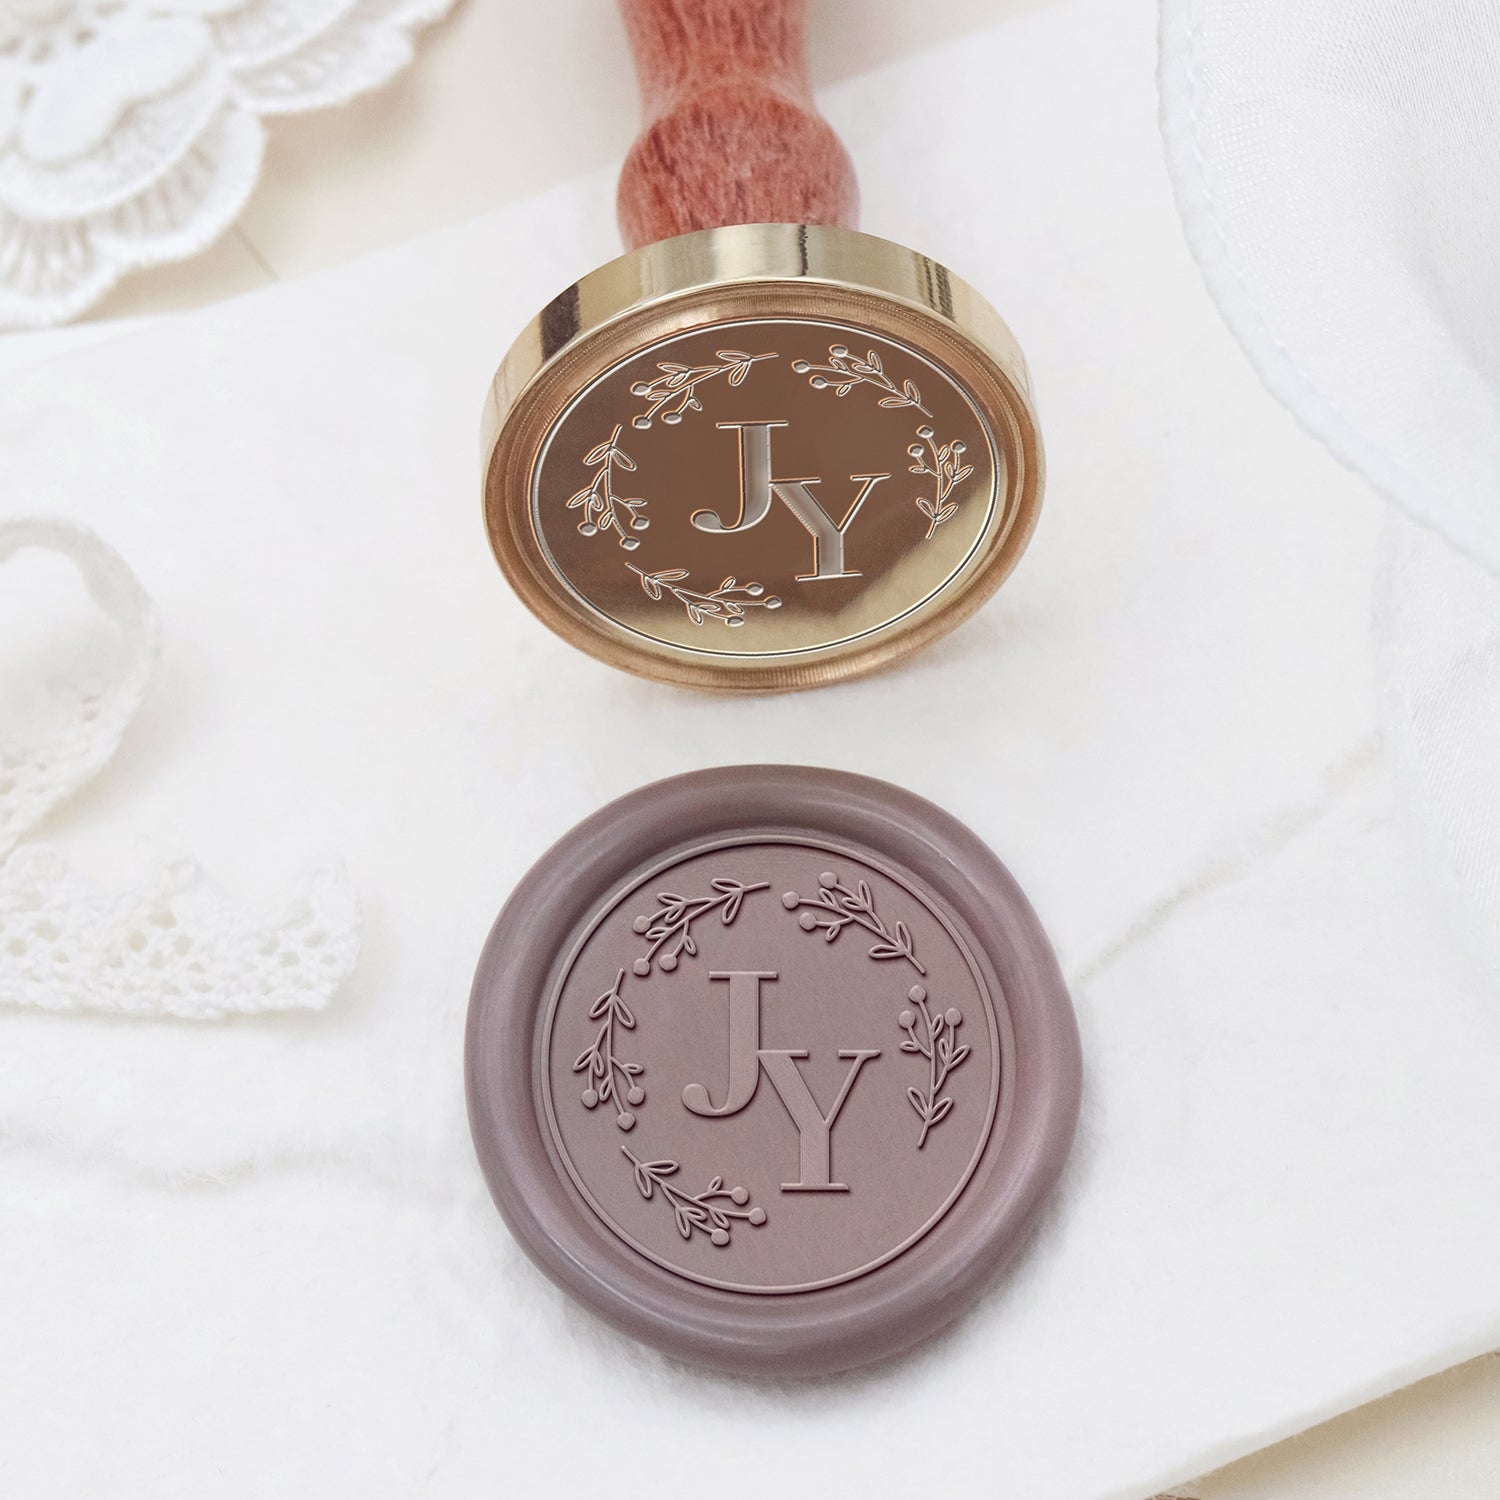 PERSONALIZED WAX SEAL STAMP CUSTOM DESIGN WITH SEALING WAX 50s